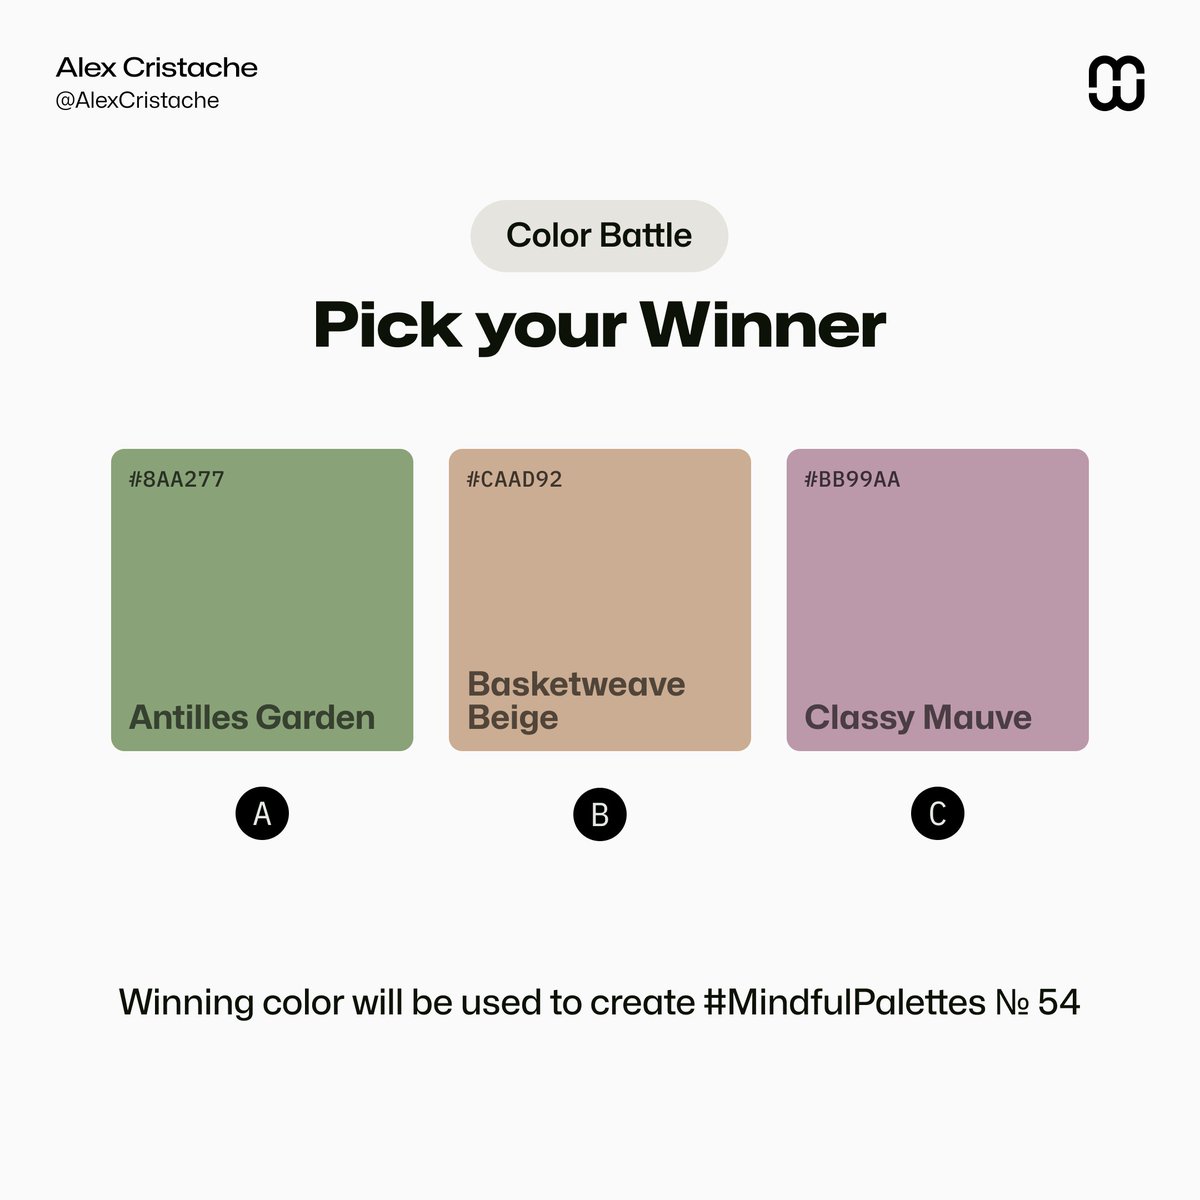 New, softer, more elegant contenders have entered the #ColorBattle arena!

Who will shape the #MindfulPalettes № 54?

A – Antilles Garden (8AA277)
B – Basketweave Beige (CAAD92)
C – Classy Mauve (BB99AA)  

3,2,1, Fight 💥 Vote now in the poll in thread below.